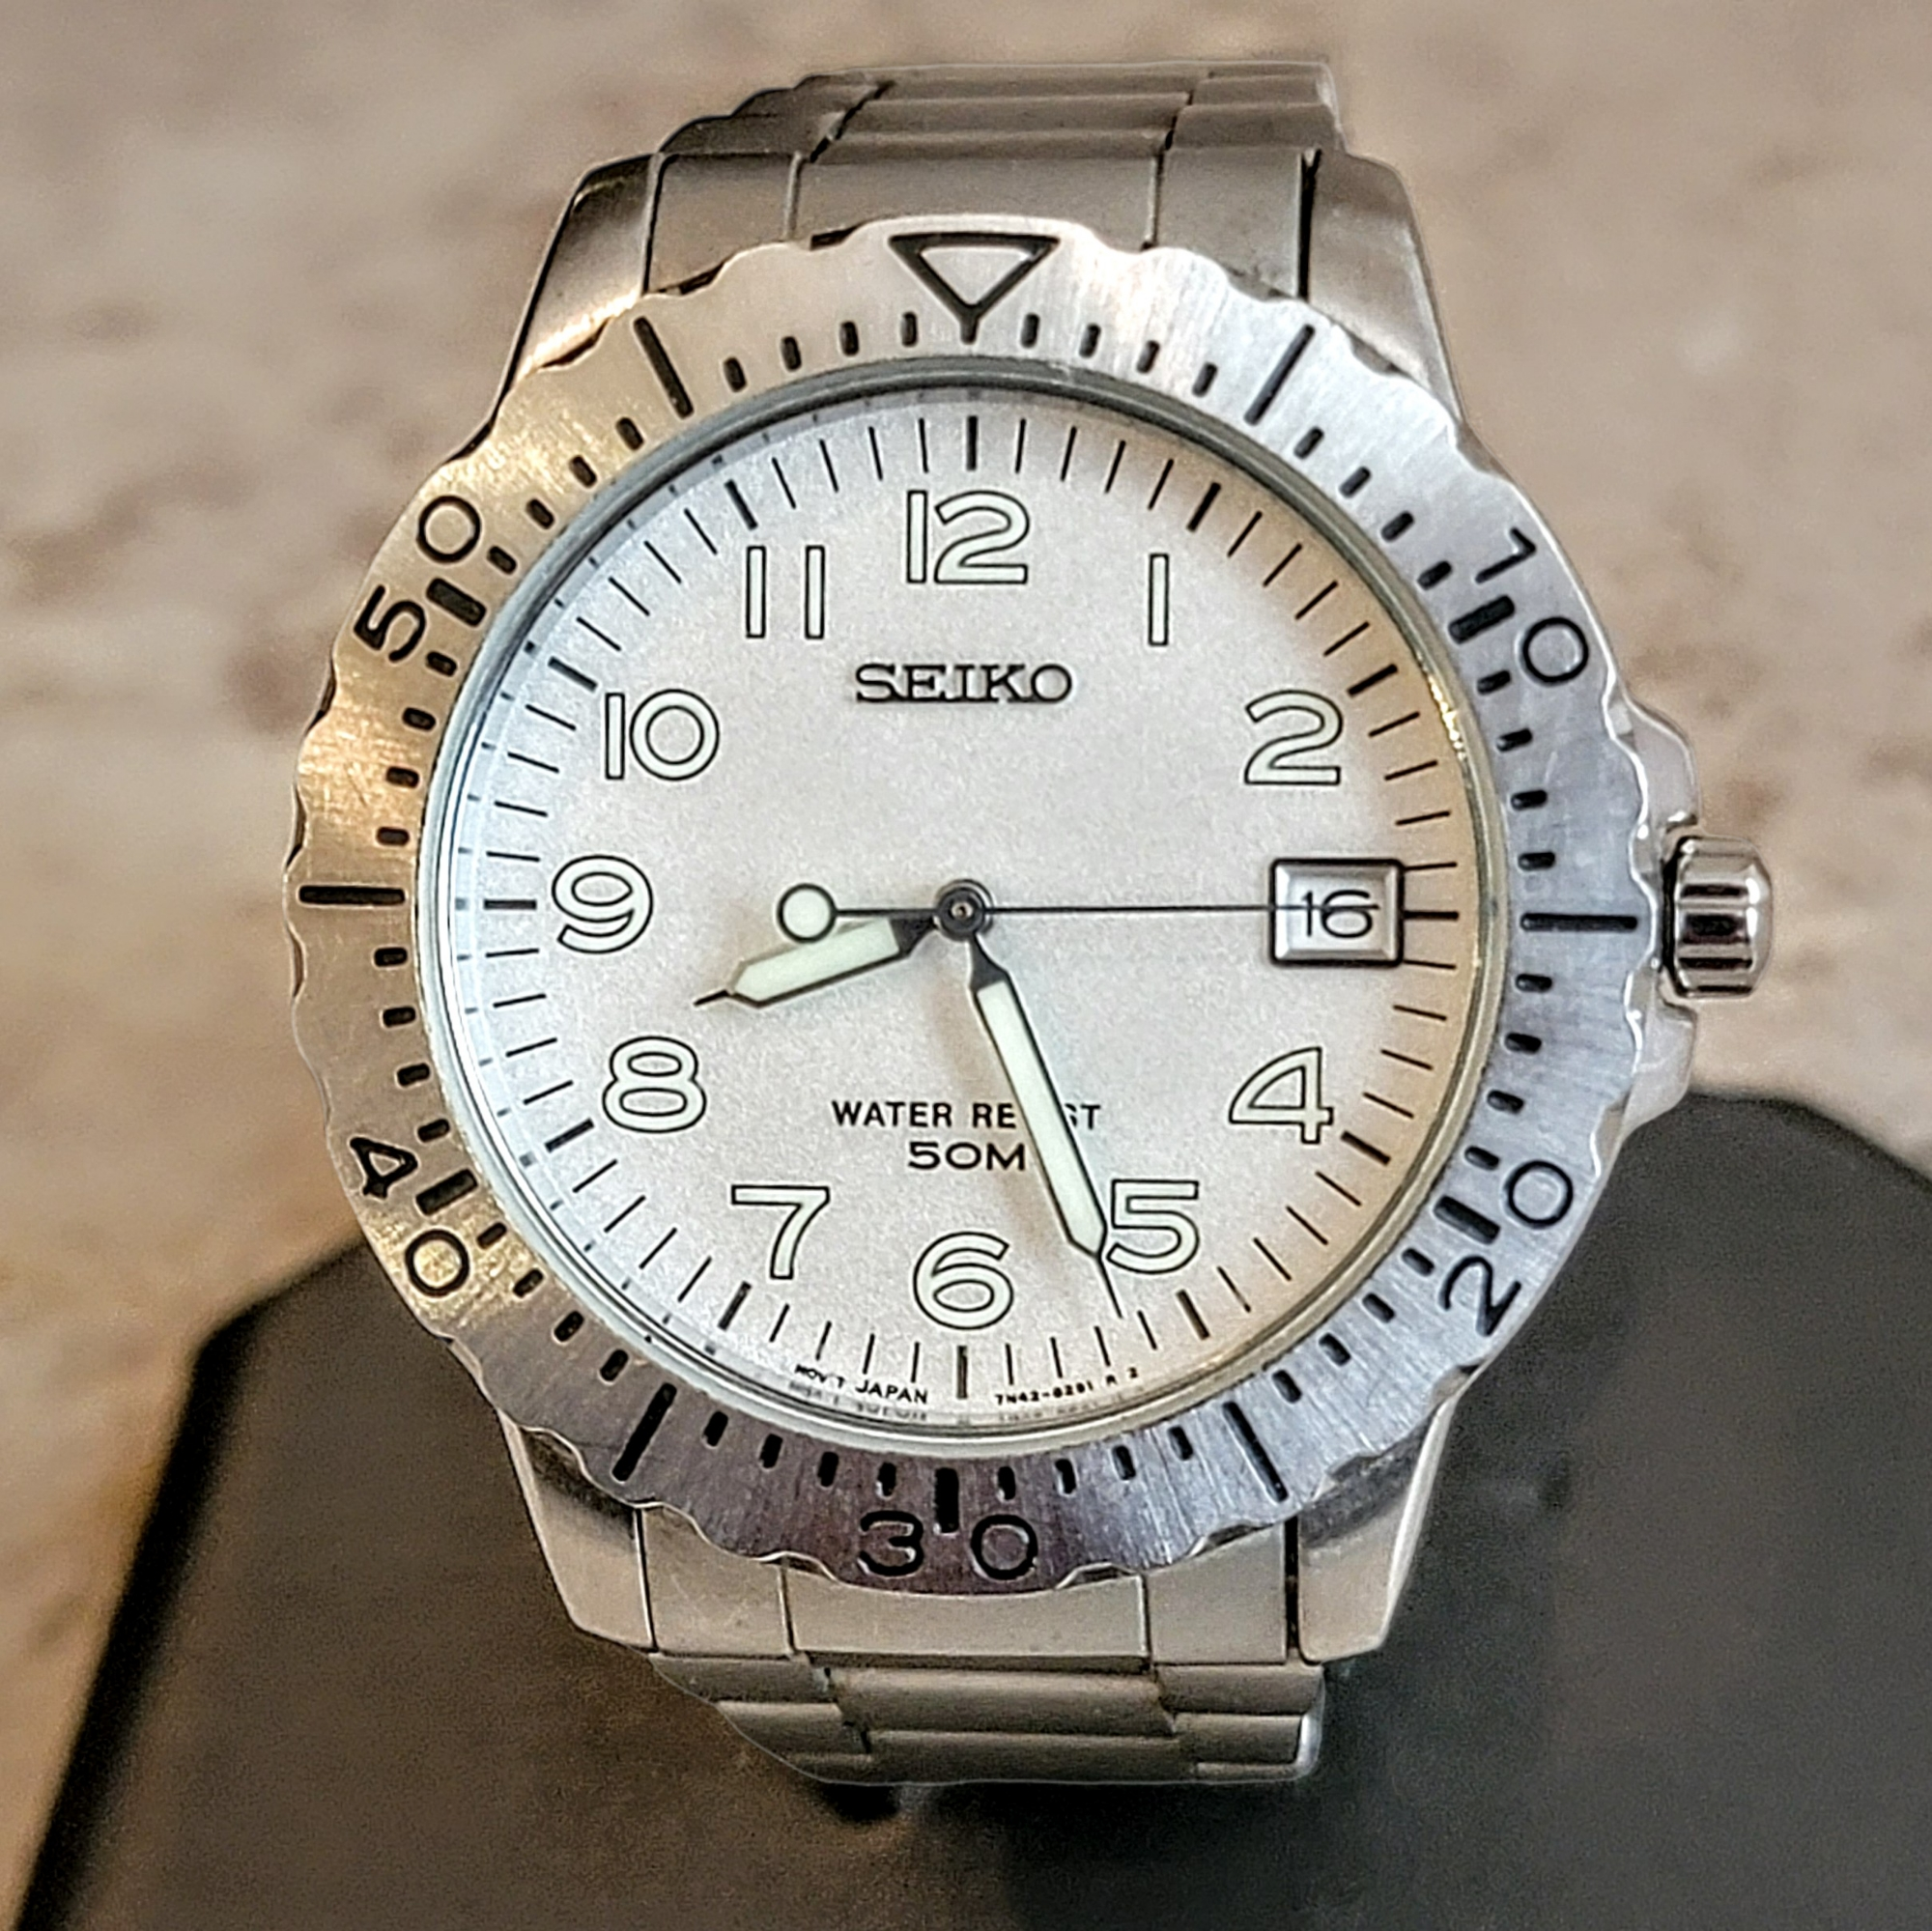 1998 SEIKO Quartz Watch -Diver Style- Date Indicator – SECOND HAND HOROLOGY